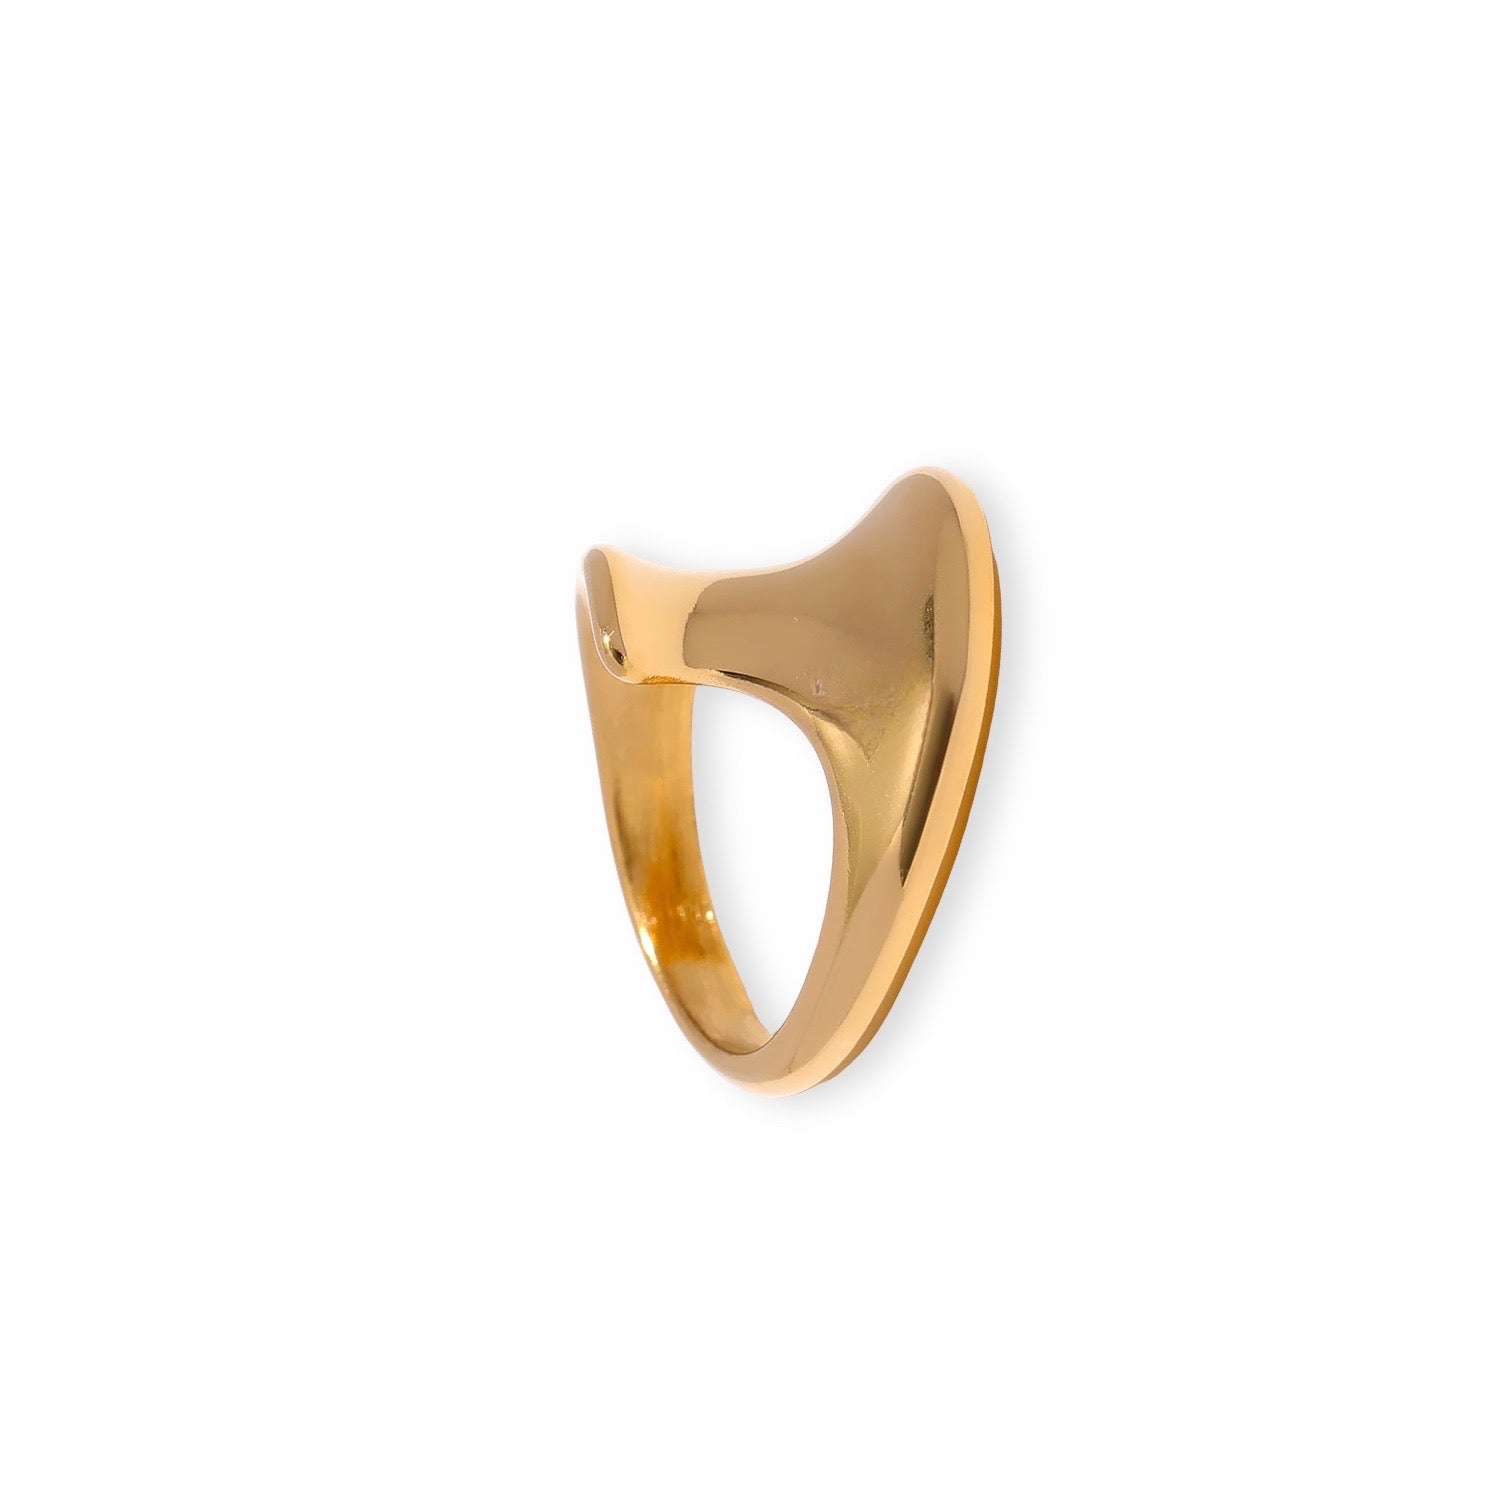 Abstract Shape Gold Stainless Steel Ring